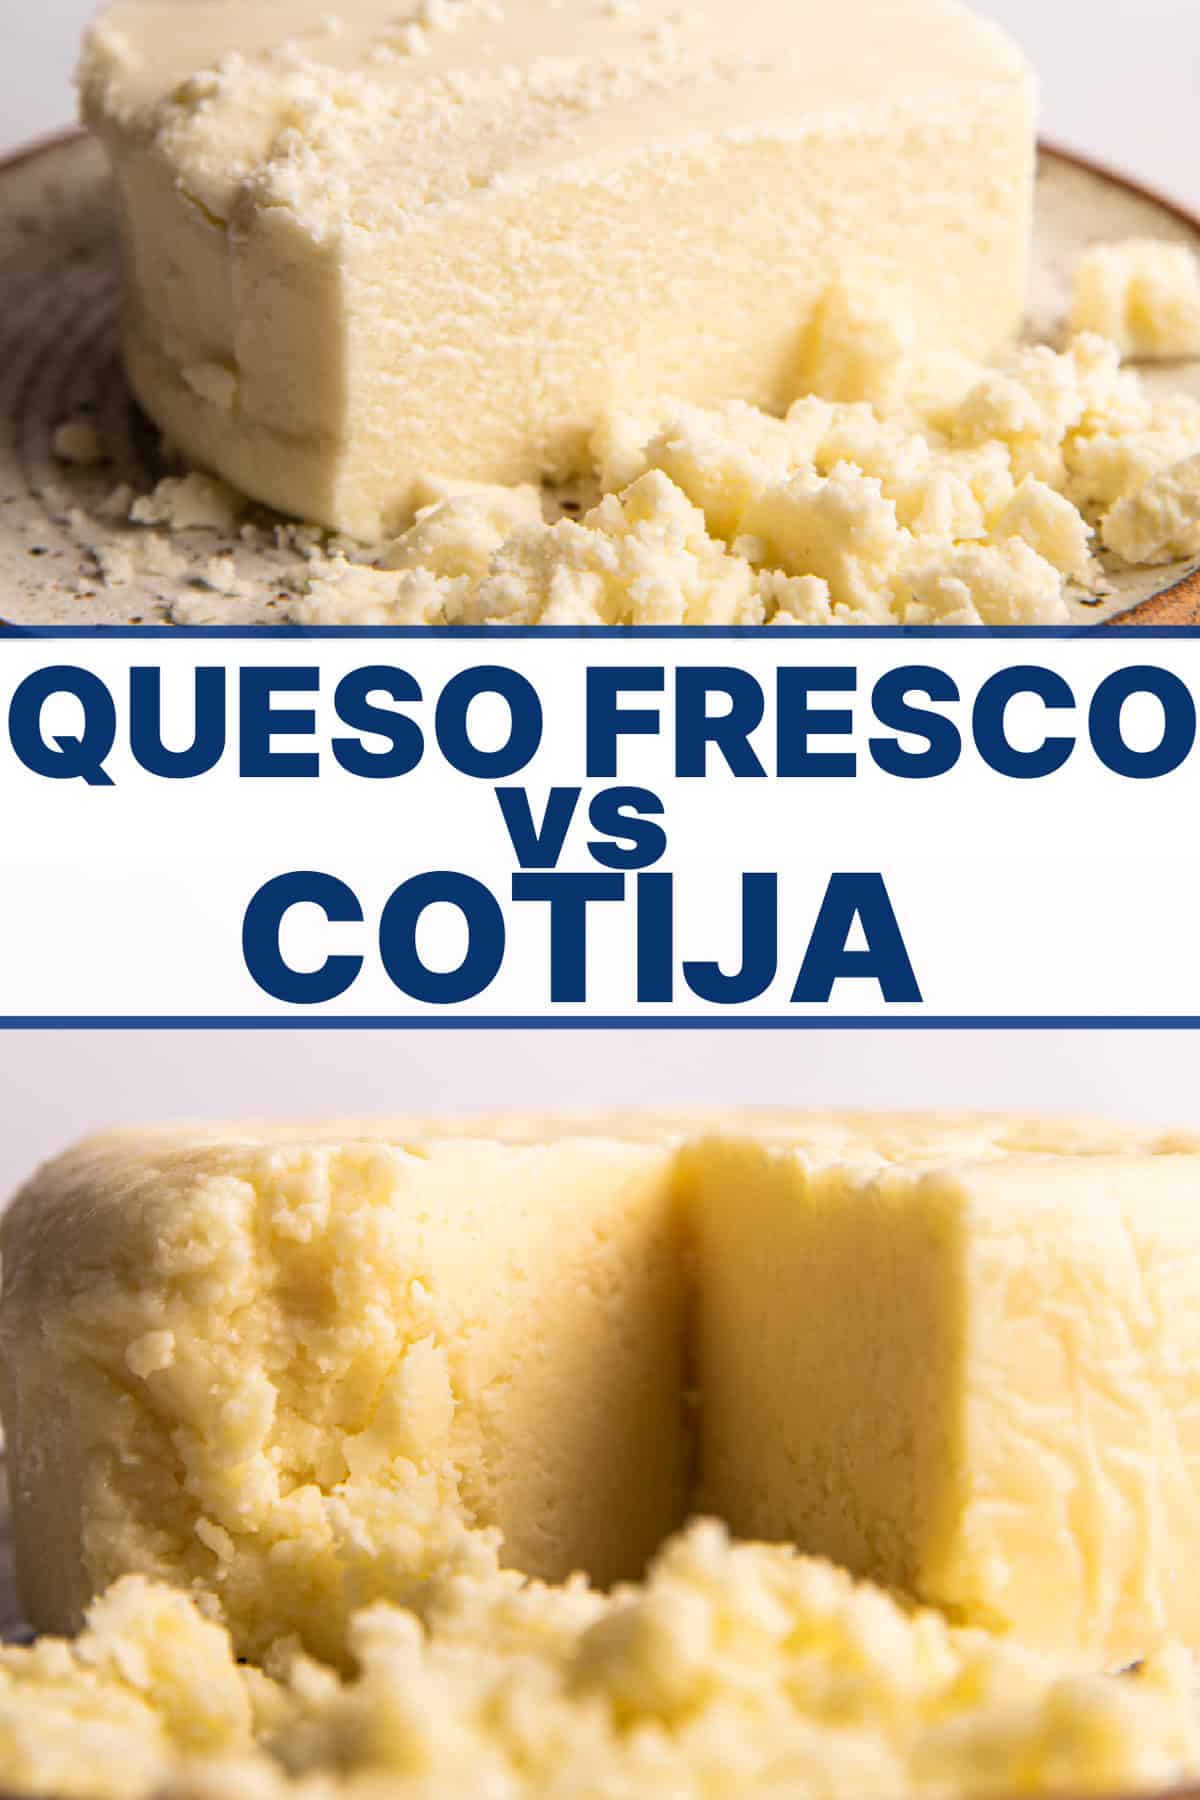 Queso fresco vs cotija cheese text with image of rounds of queso fresco on top and cotija cheese on the bottom.